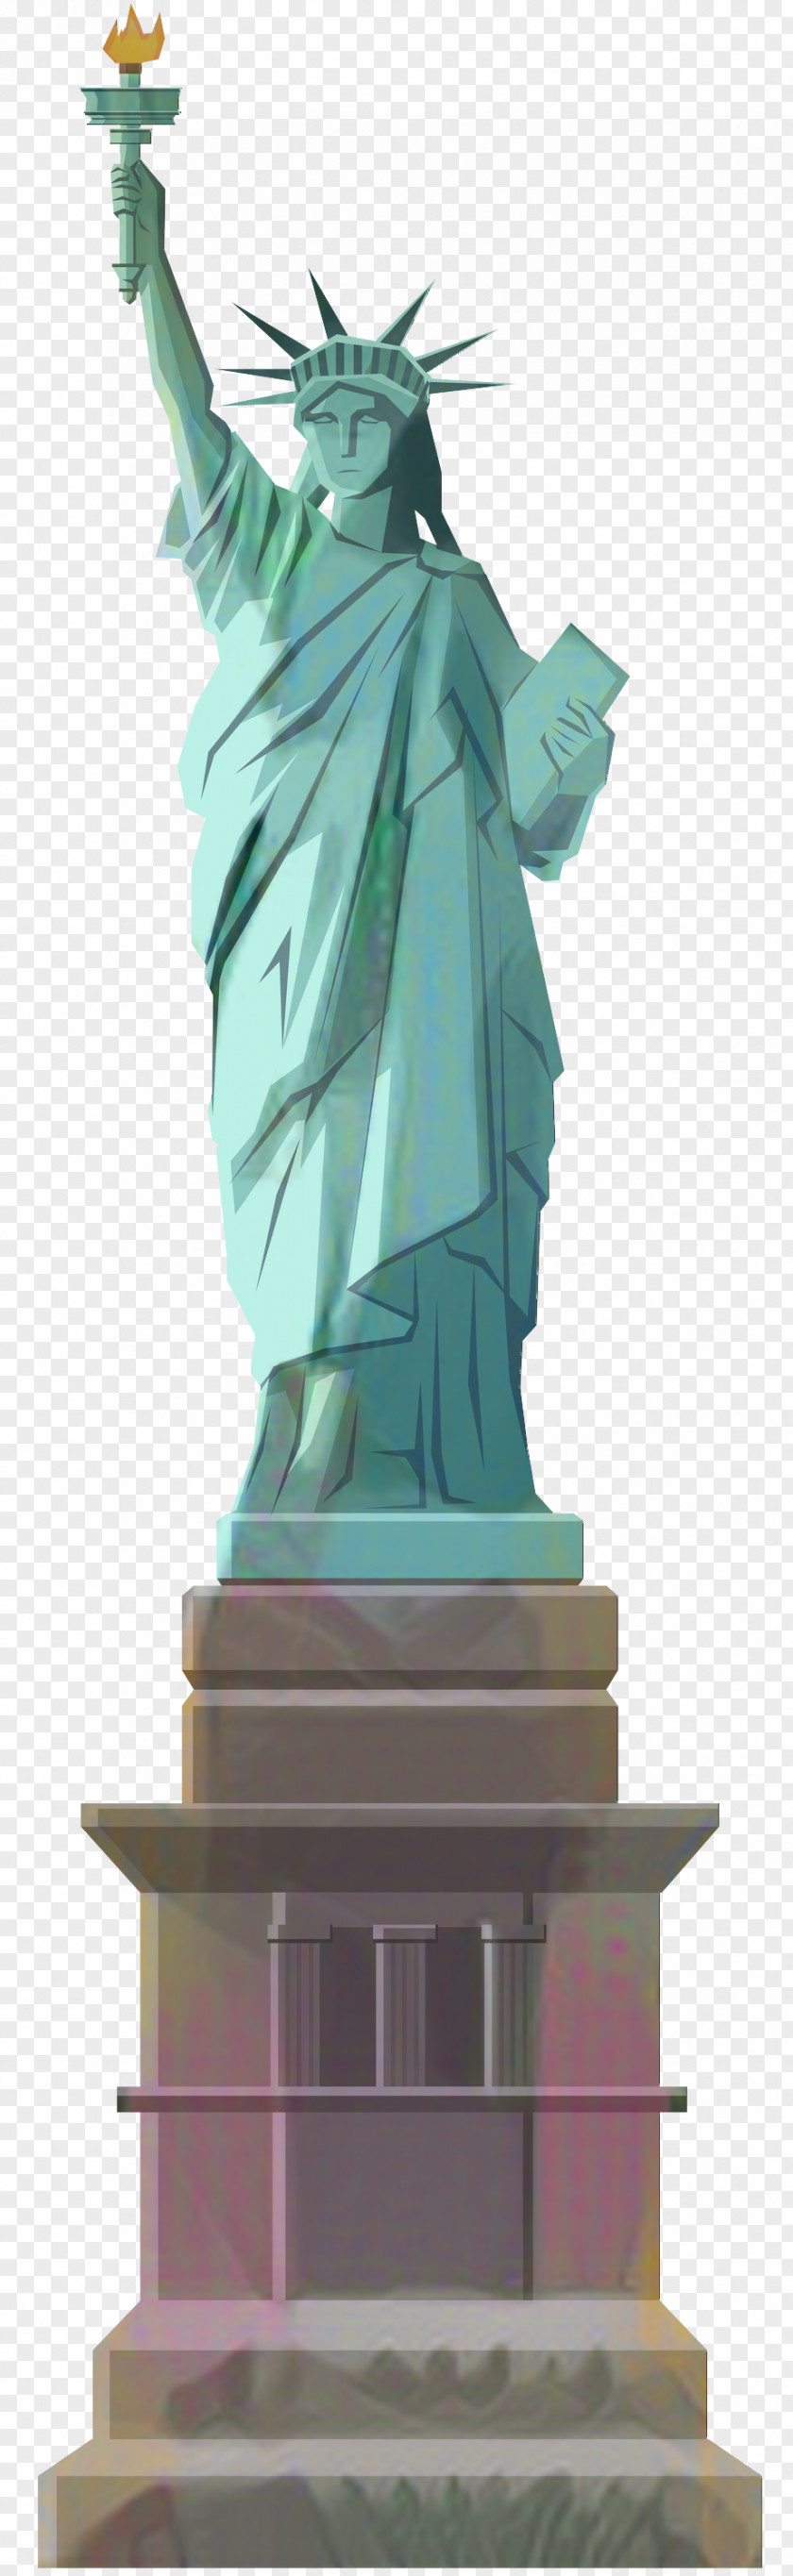 Statue Of Liberty National Monument Sculpture Drawing Clip Art PNG